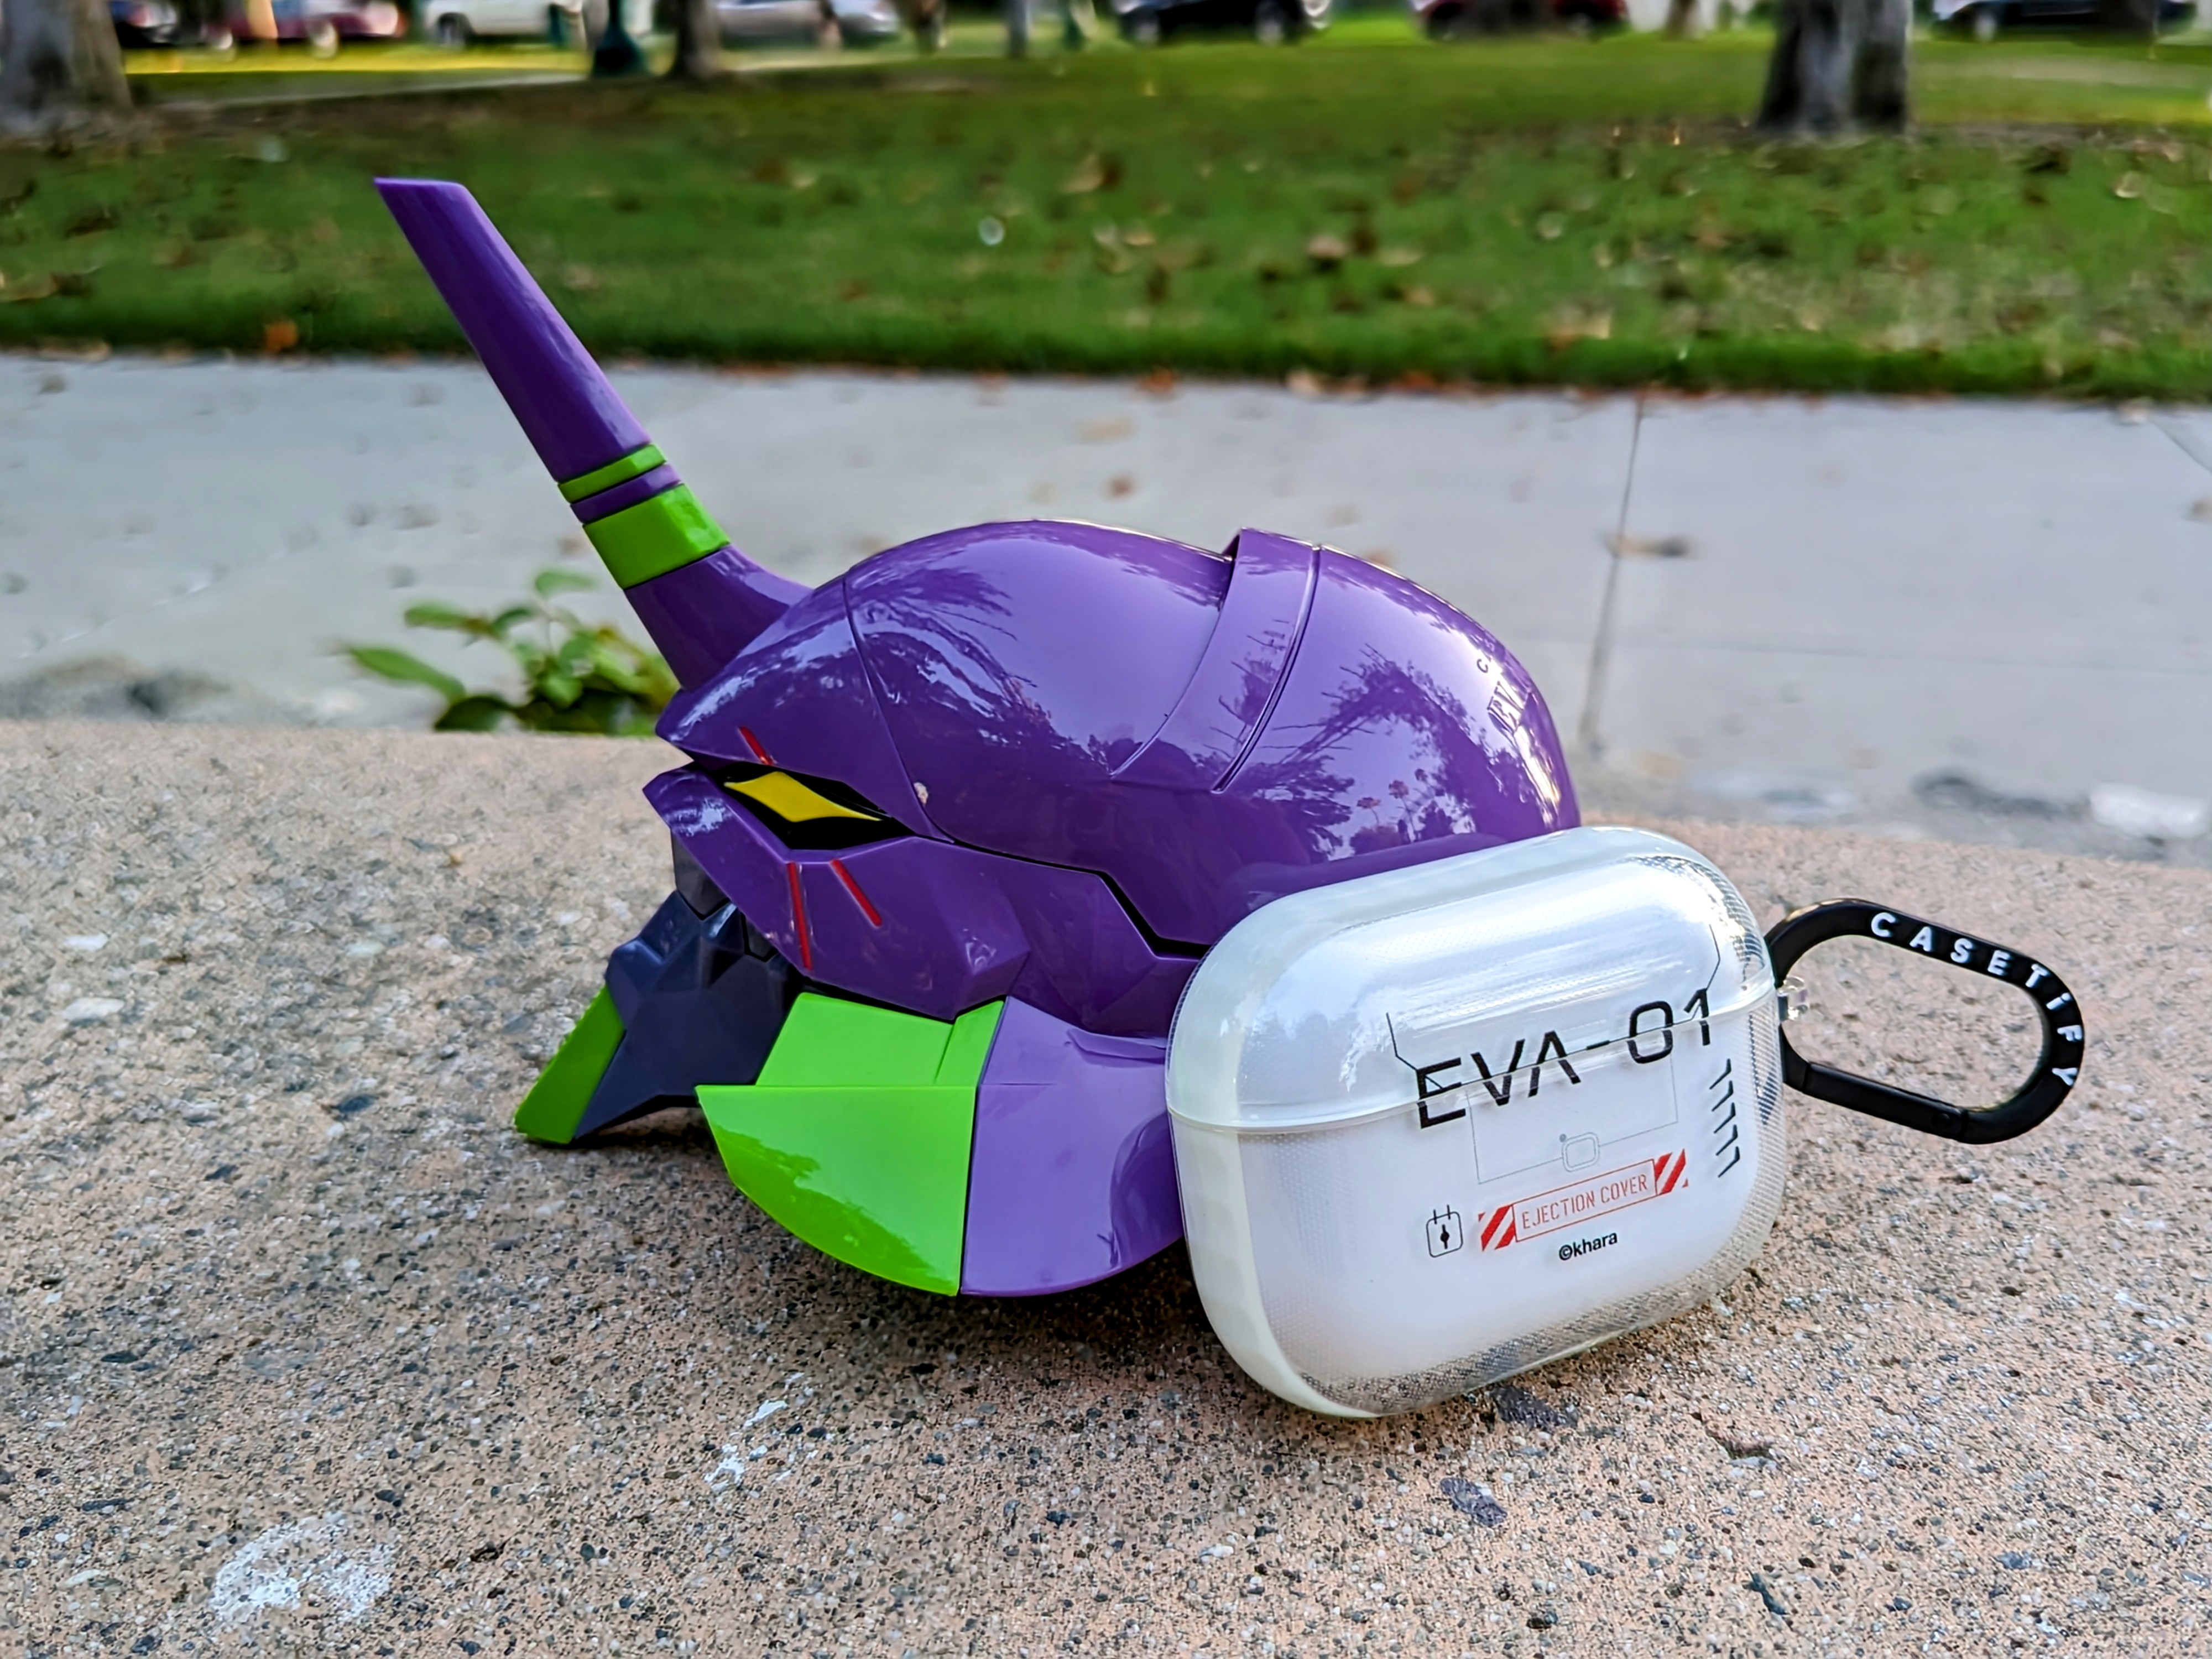 CASETiFY Evangelion Type-01 AirPods Pro 2 case with inner case on the outside.